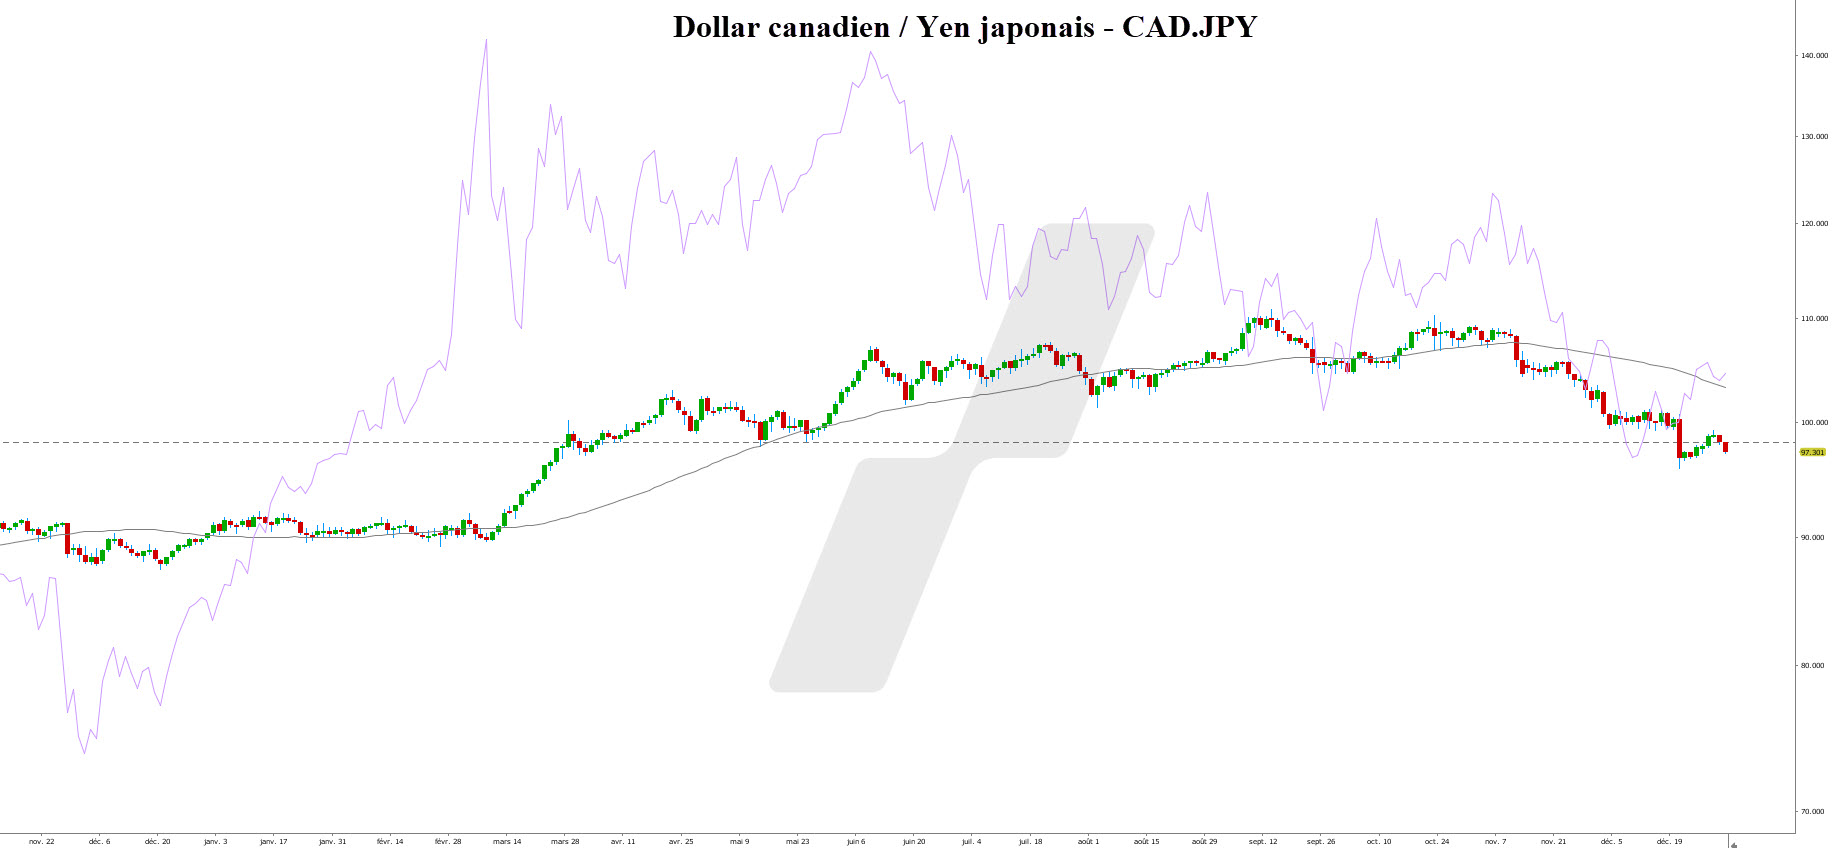 forex trading - marché des changes - CADJPY